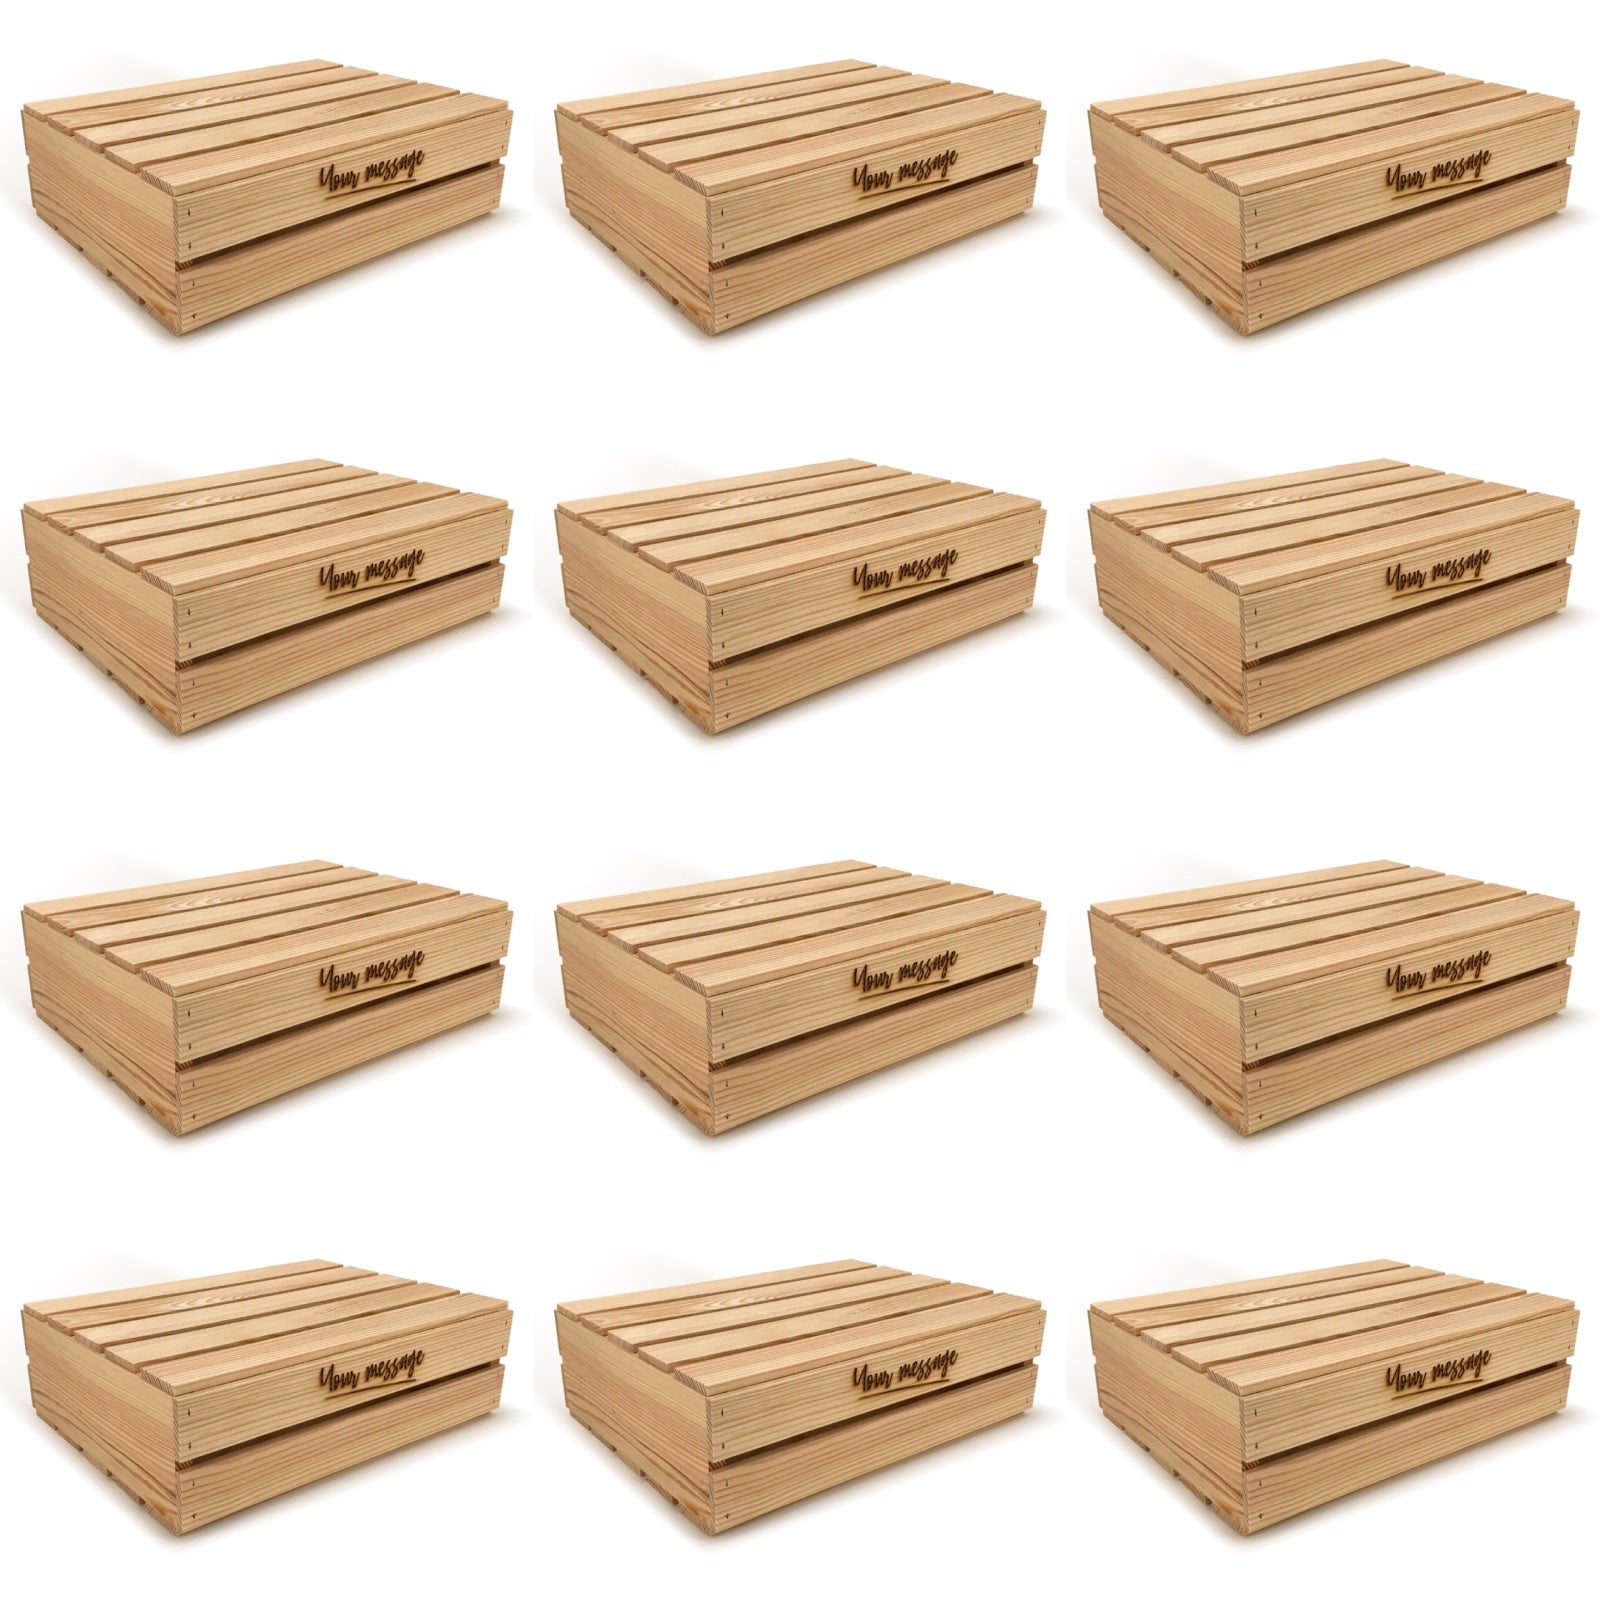 12 Small wooden crates with lid and custom message 18x14x5.25, 6-WS-18-14-5.25-ST-NW-LL, 12-WS-18-14-5.25-ST-NW-LL, 24-WS-18-14-5.25-ST-NW-LL, 48-WS-18-14-5.25-ST-NW-LL, 96-WS-18-14-5.25-ST-NW-LL